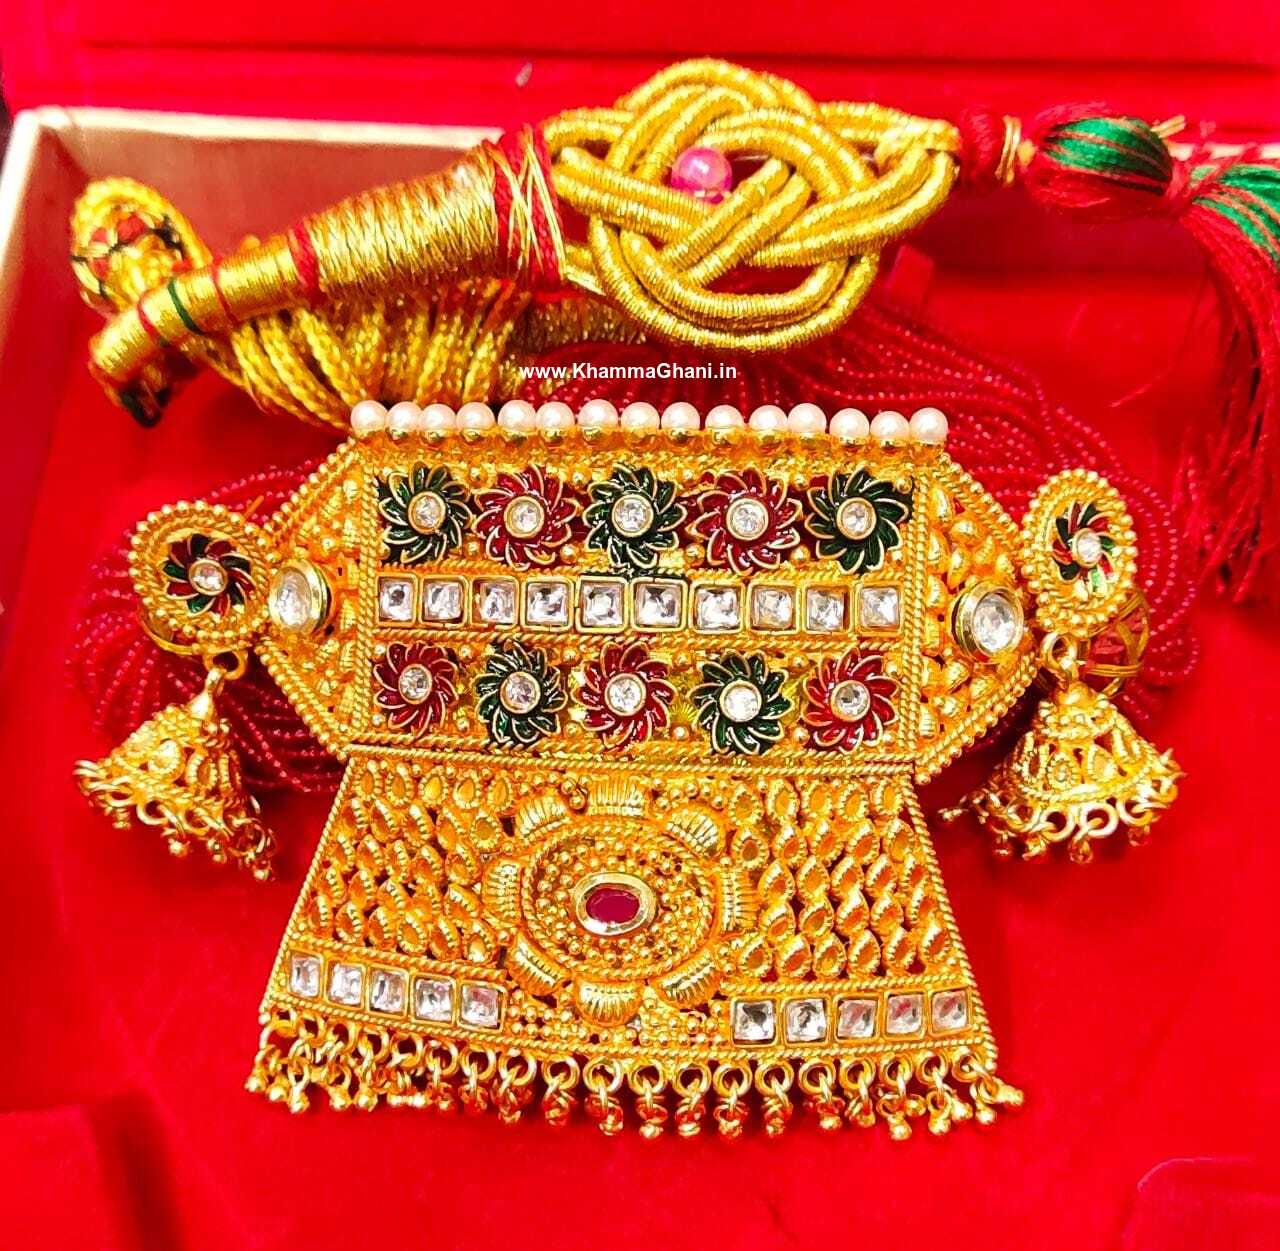 Artificial Jewelry – Types of Indian Ornaments